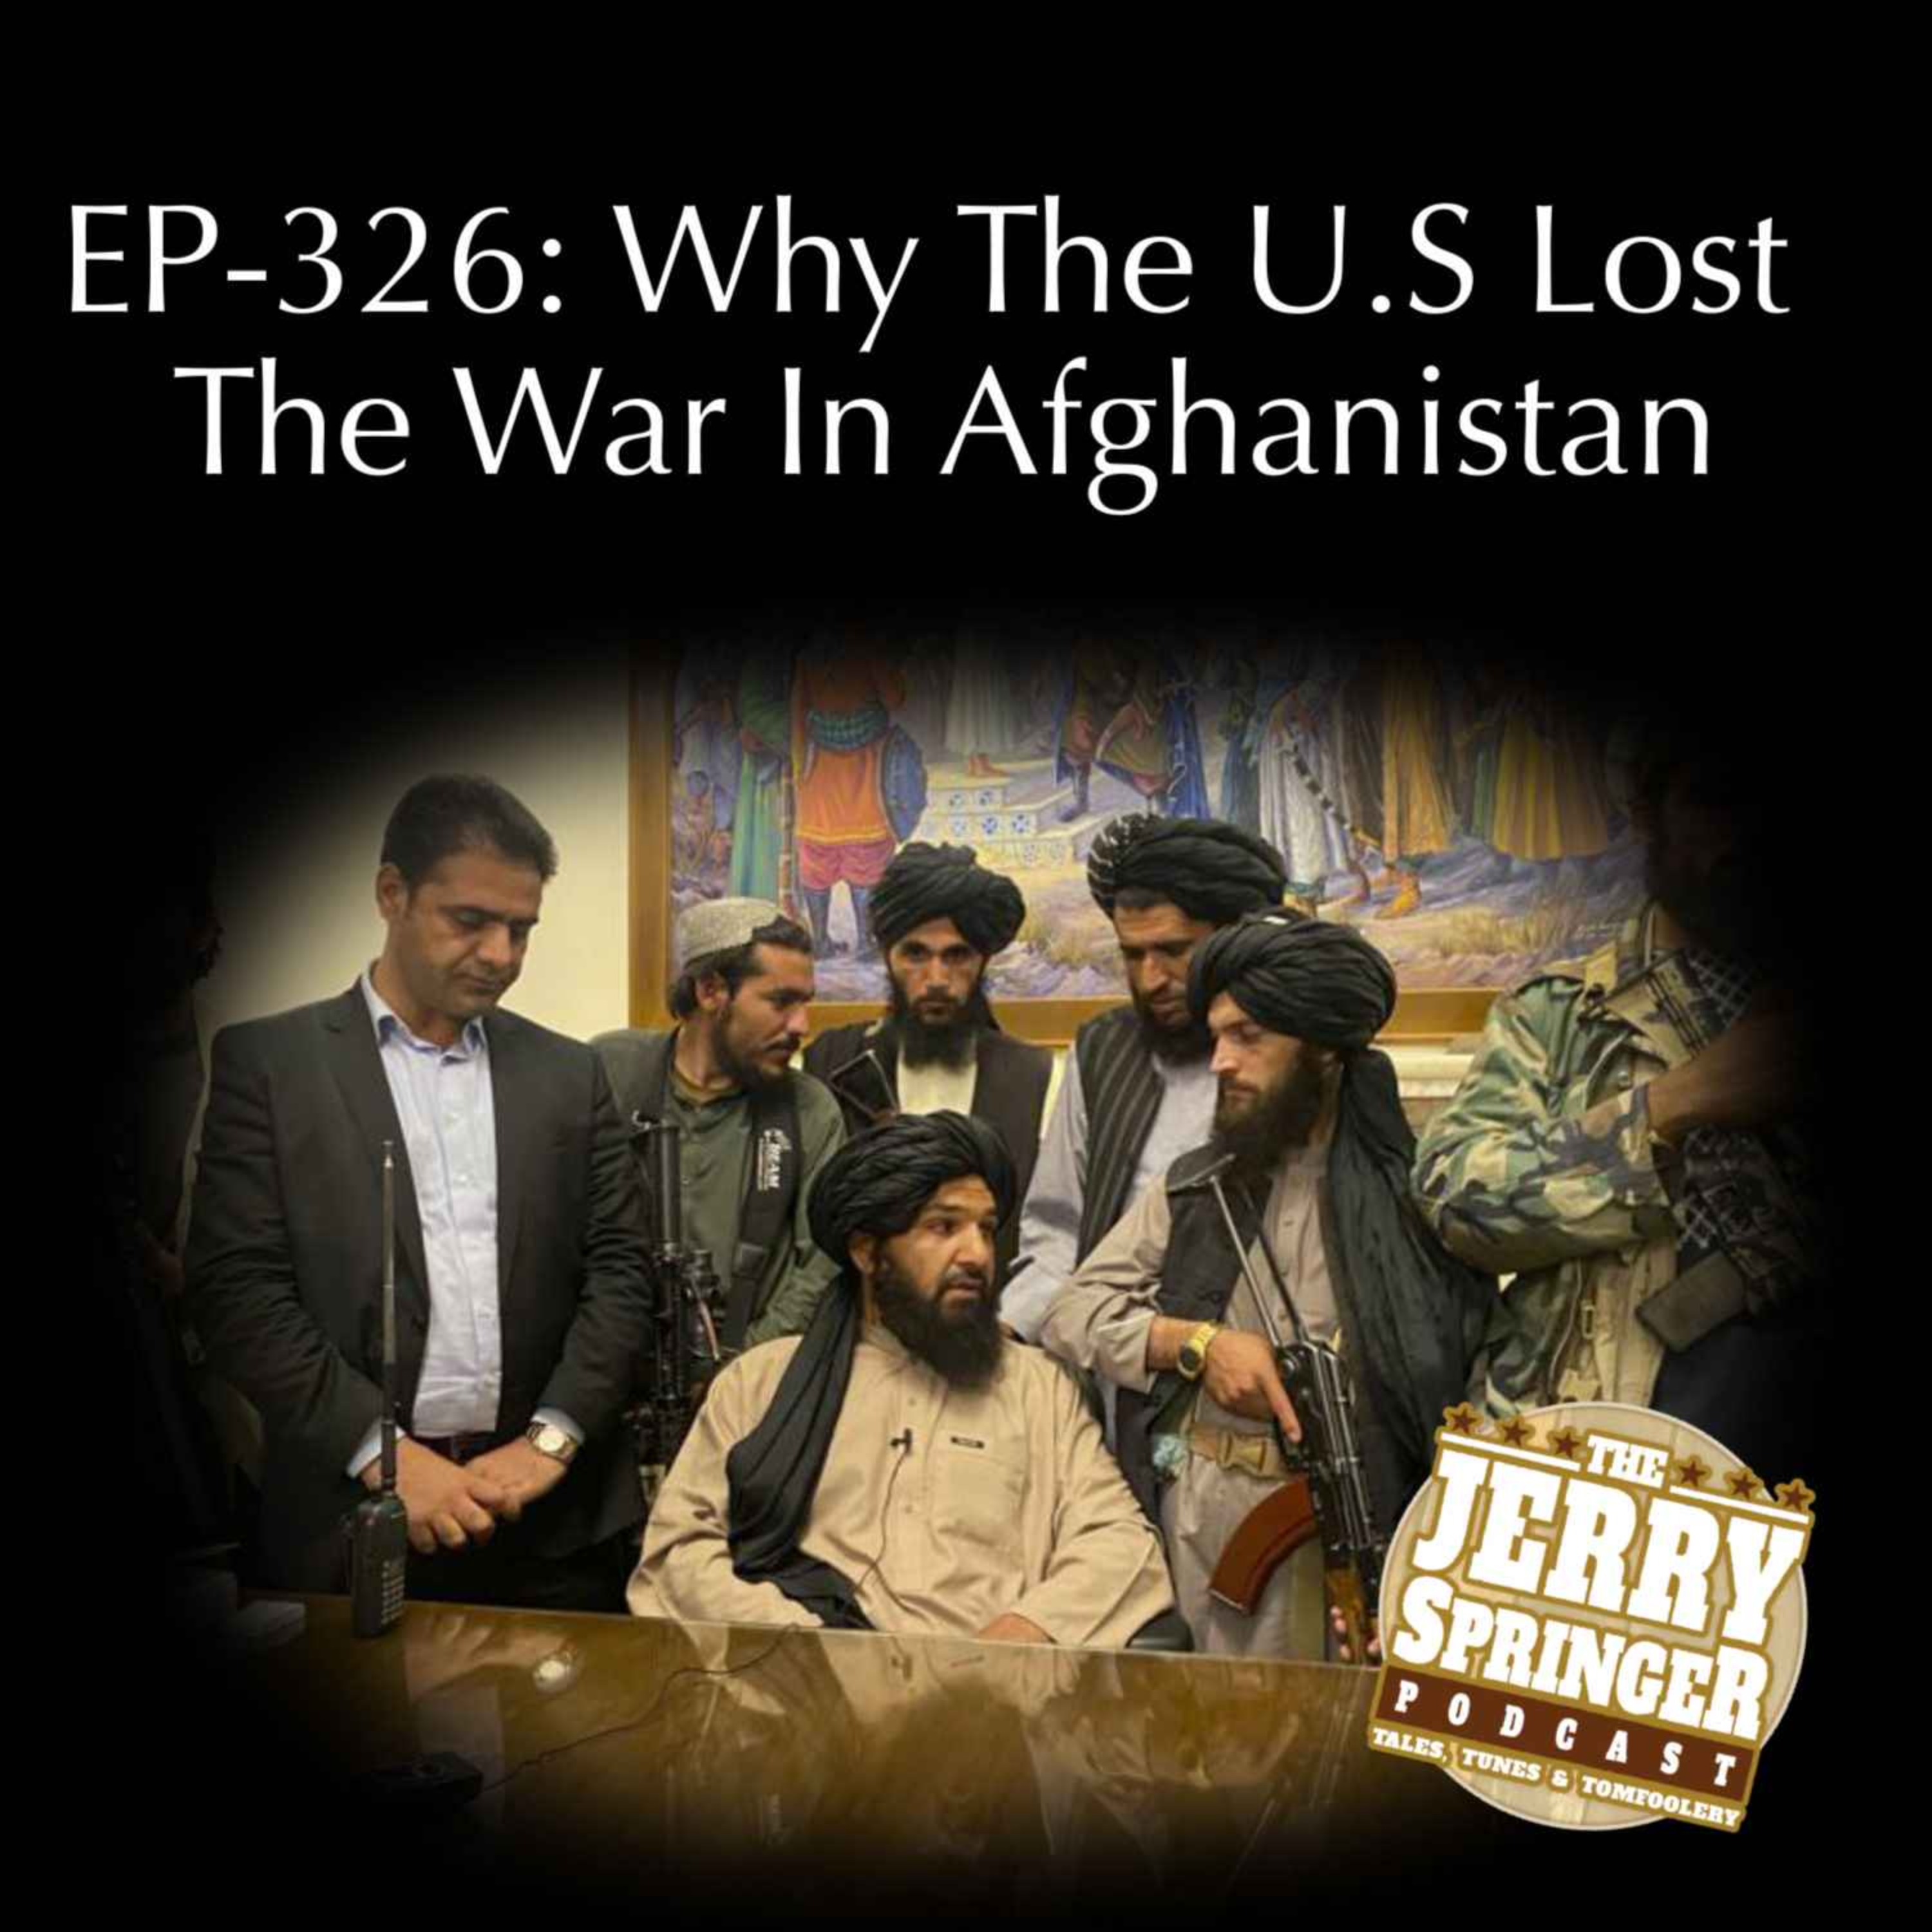 Why The U.S Lost The War In Afghanistan: EP-326